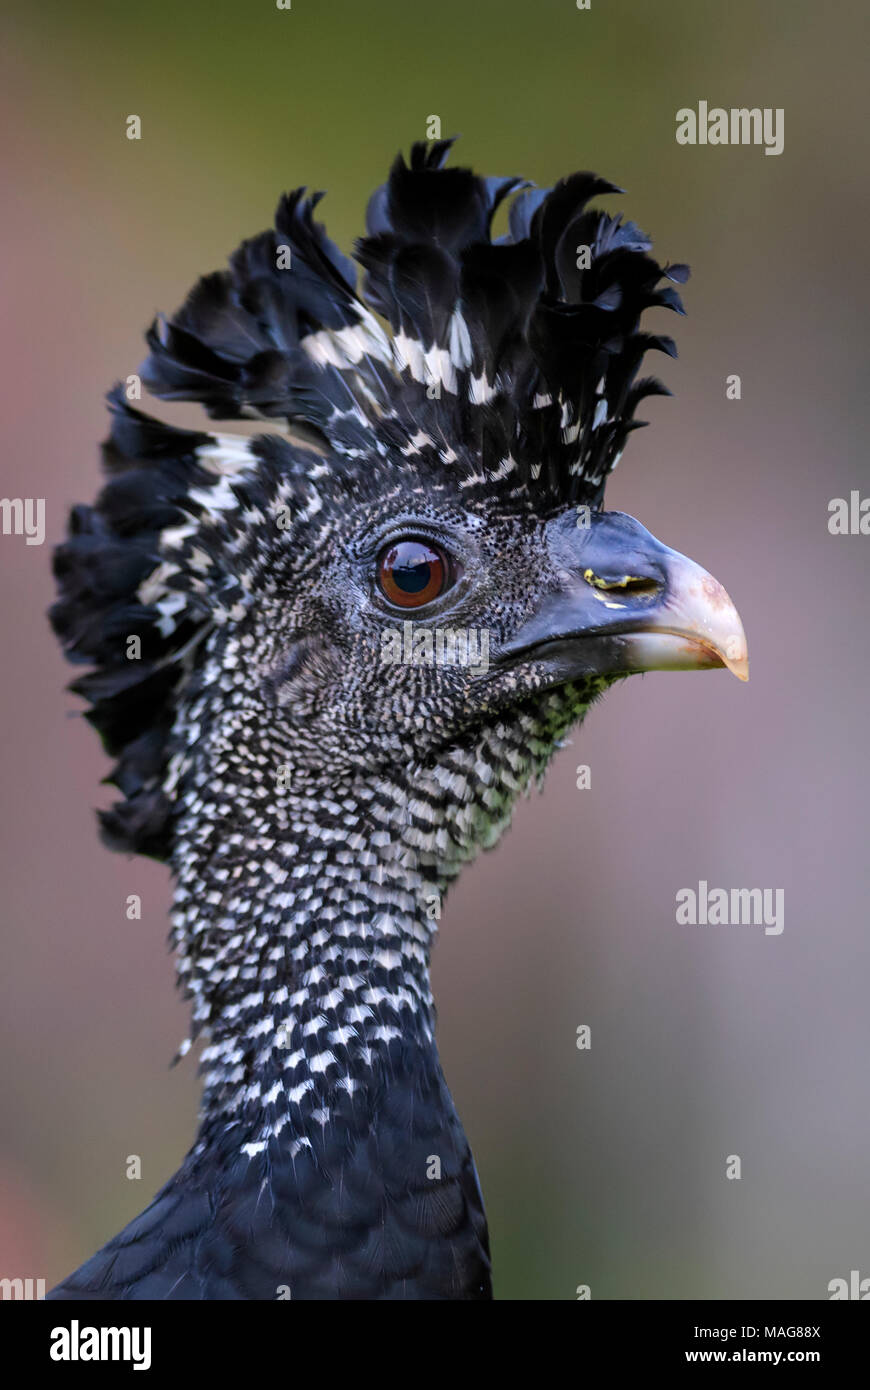 Great Curassow - Crax rubra, large pheasant-like bird from the Neotropical rainforests, Costa Rica. Stock Photo